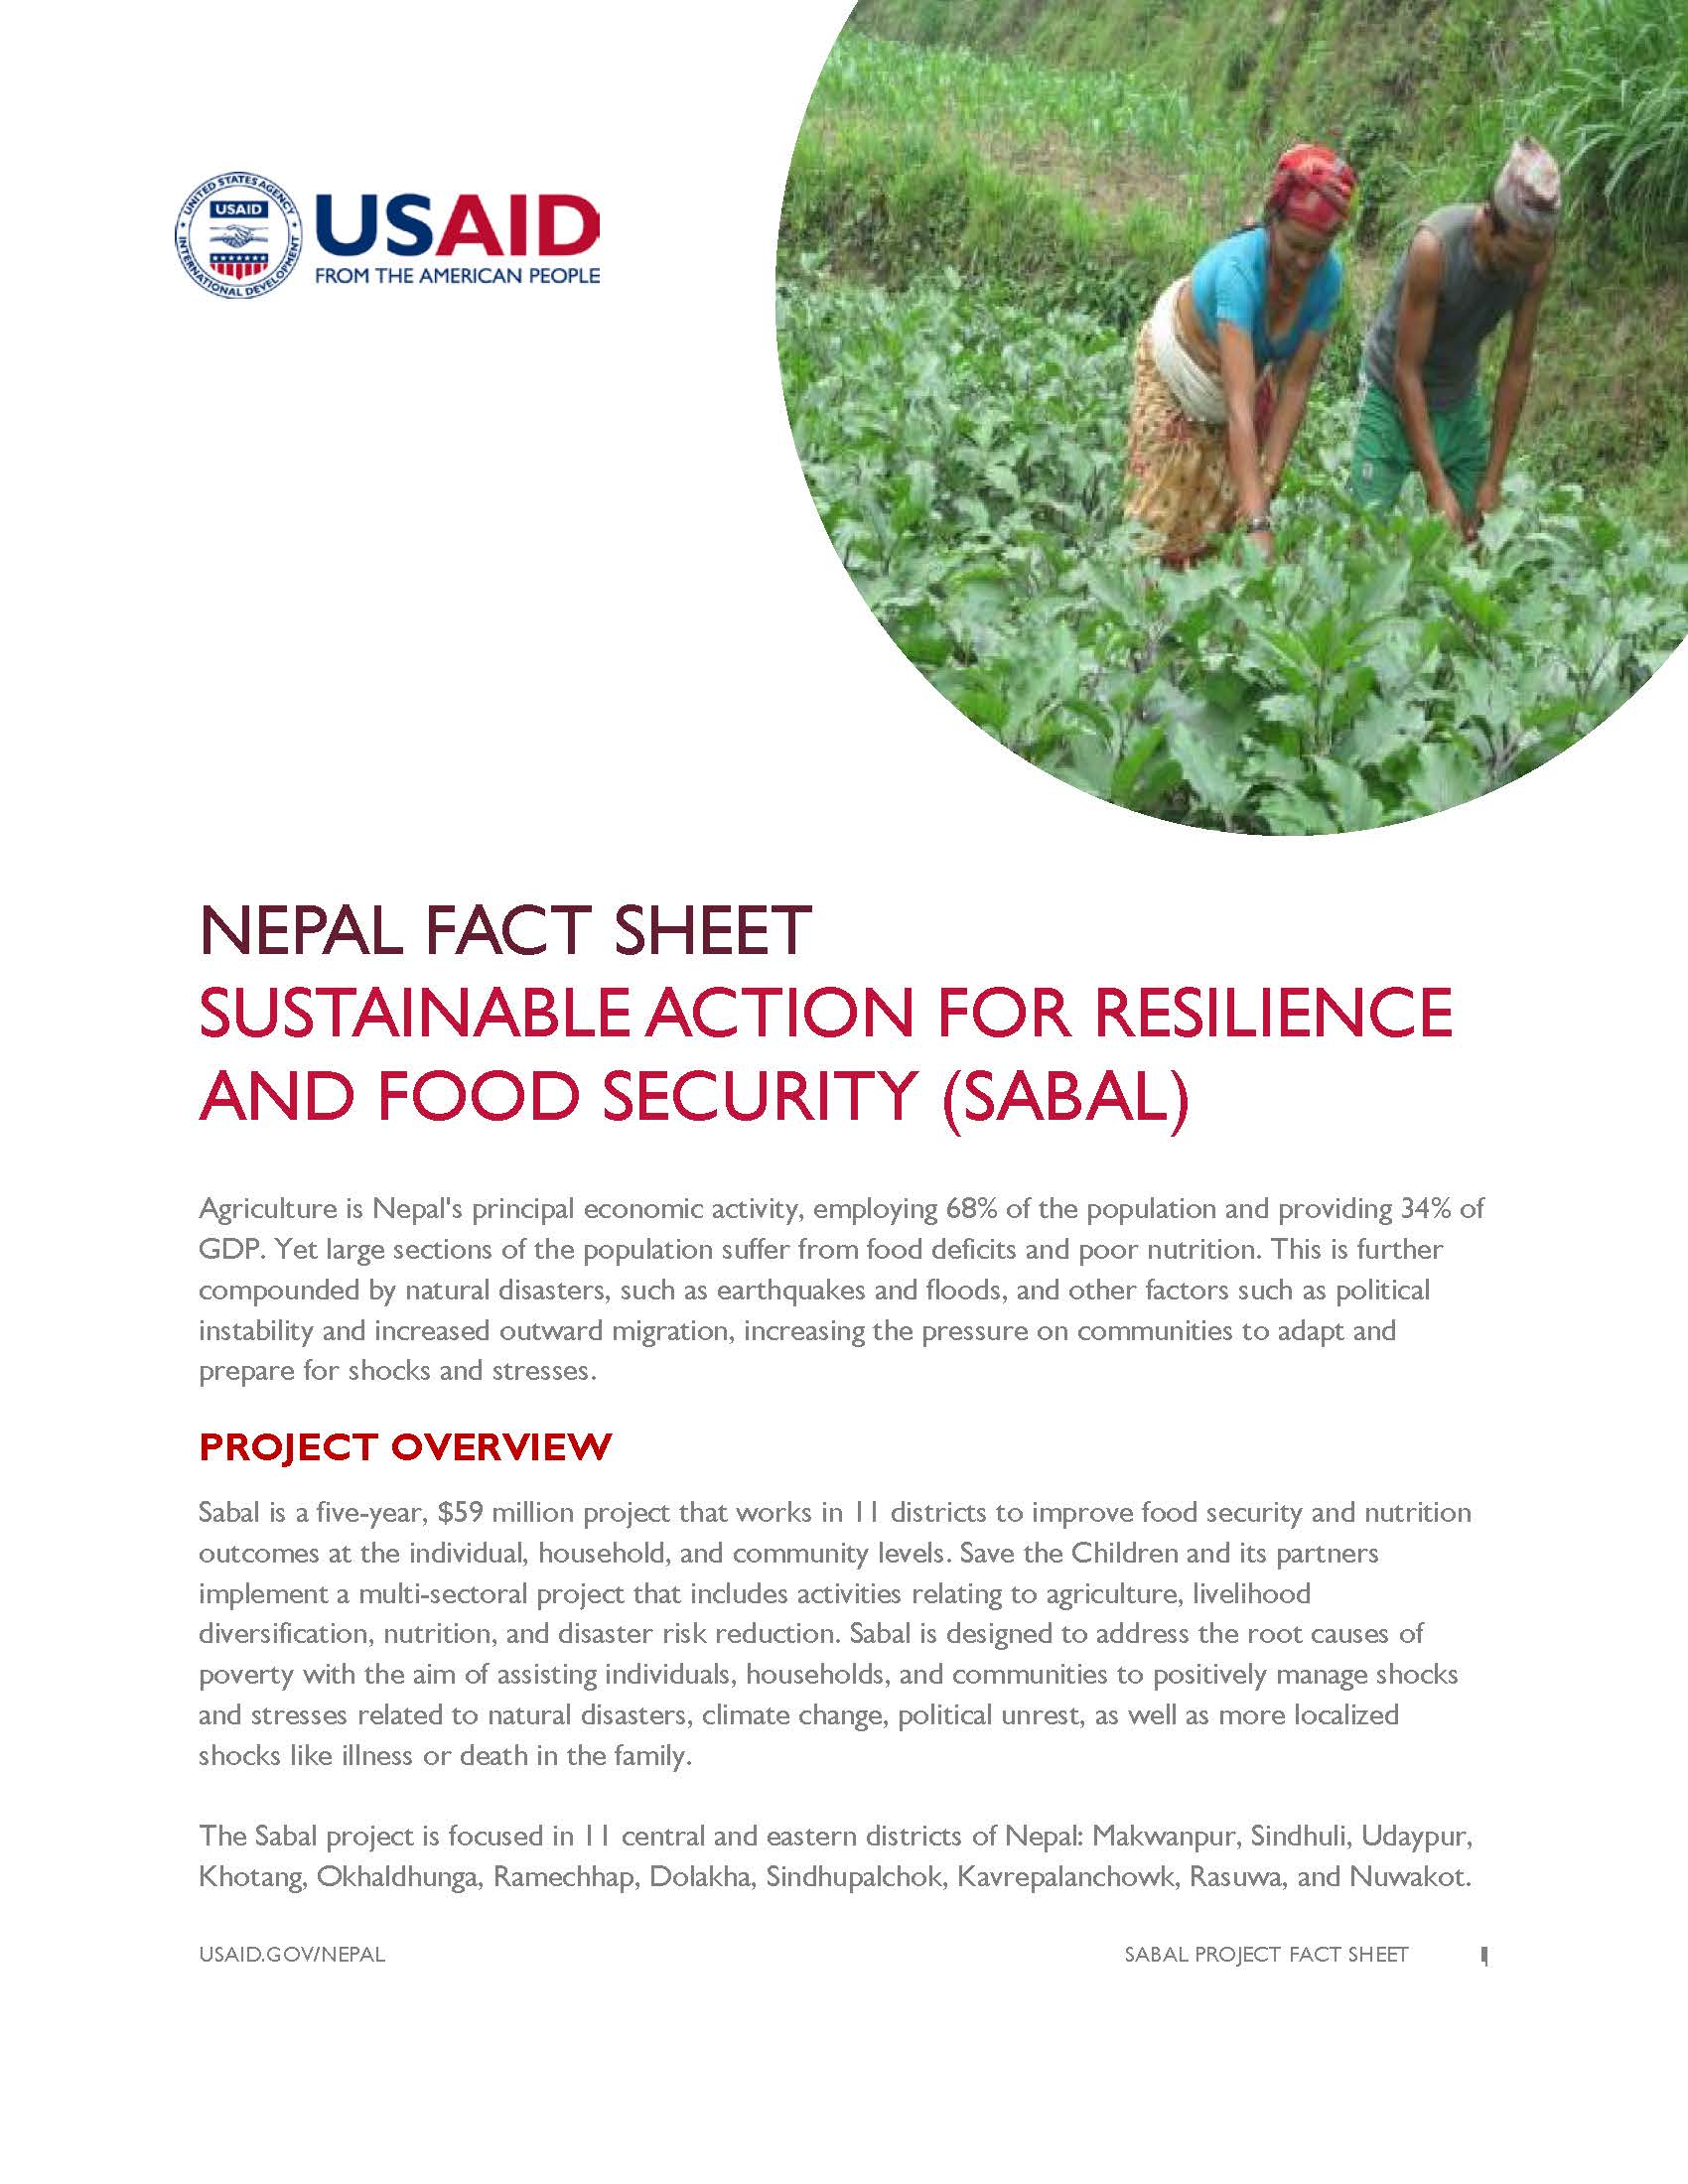 FACT SHEET: Sustainable Action for Resilience and Food Security (SABAL)